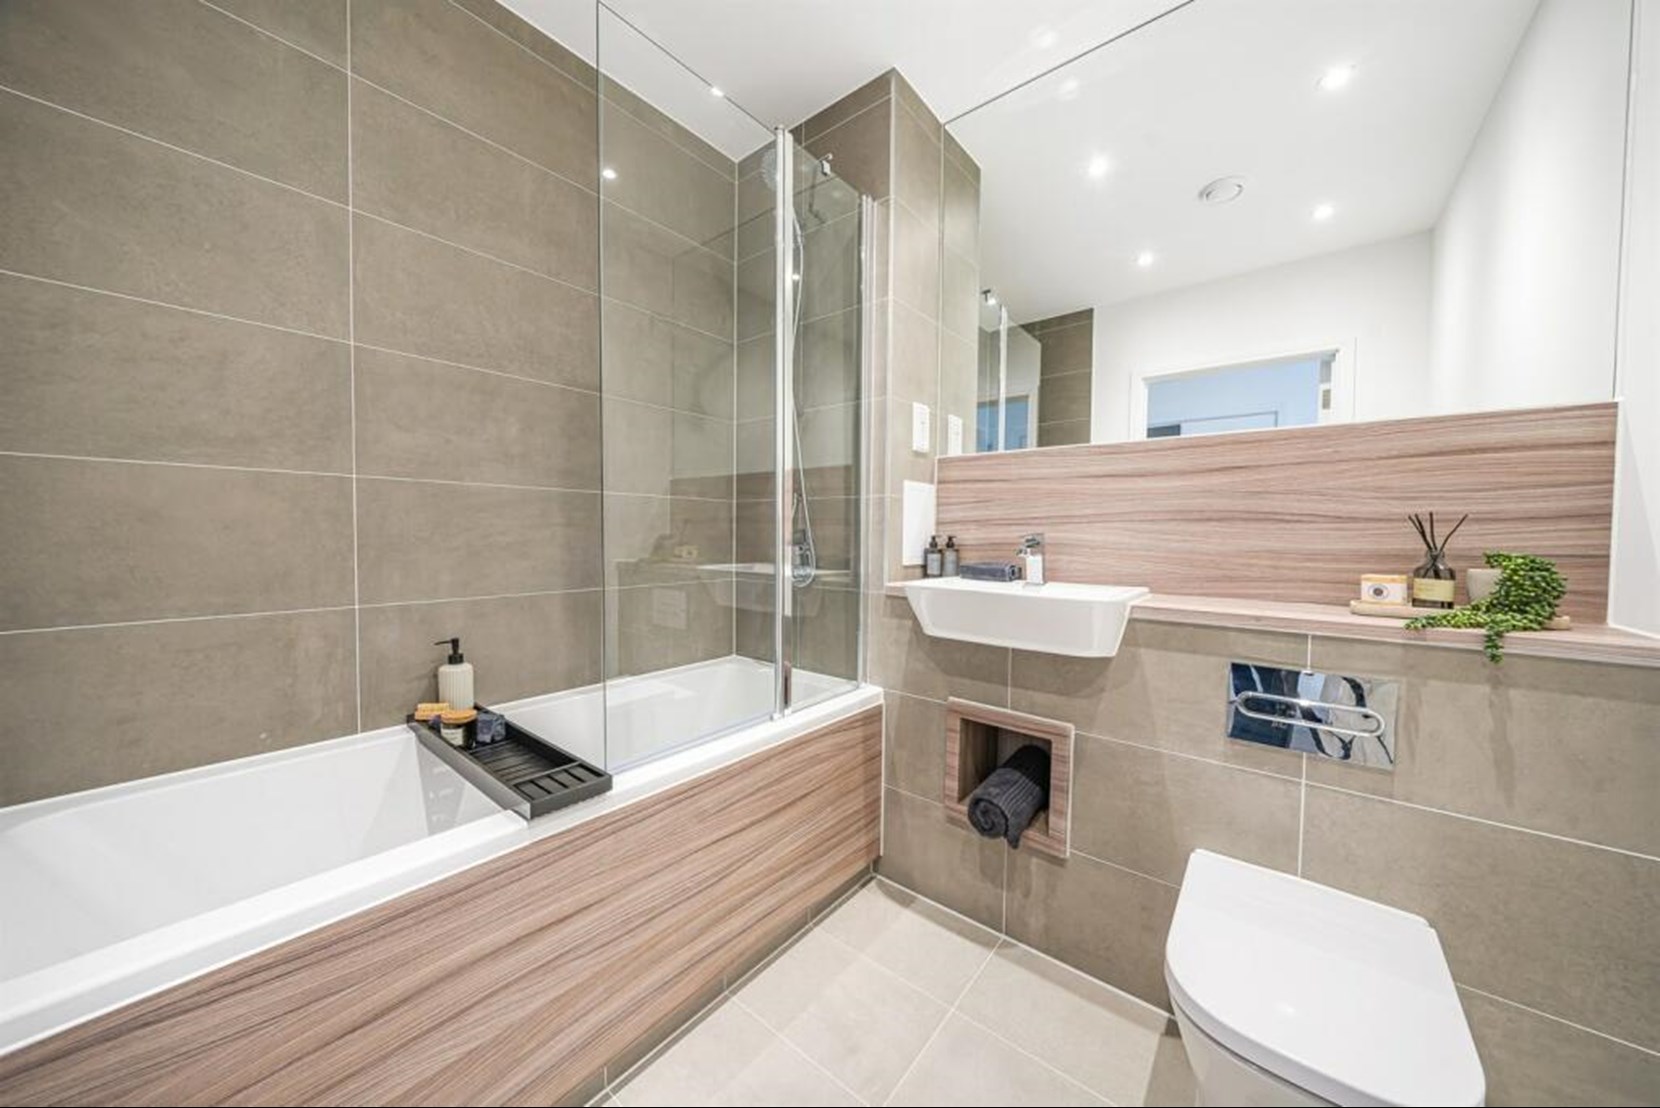 Apartments to Rent by Simple Life London in Beam Park, Havering, RM13, The Puma bathroom